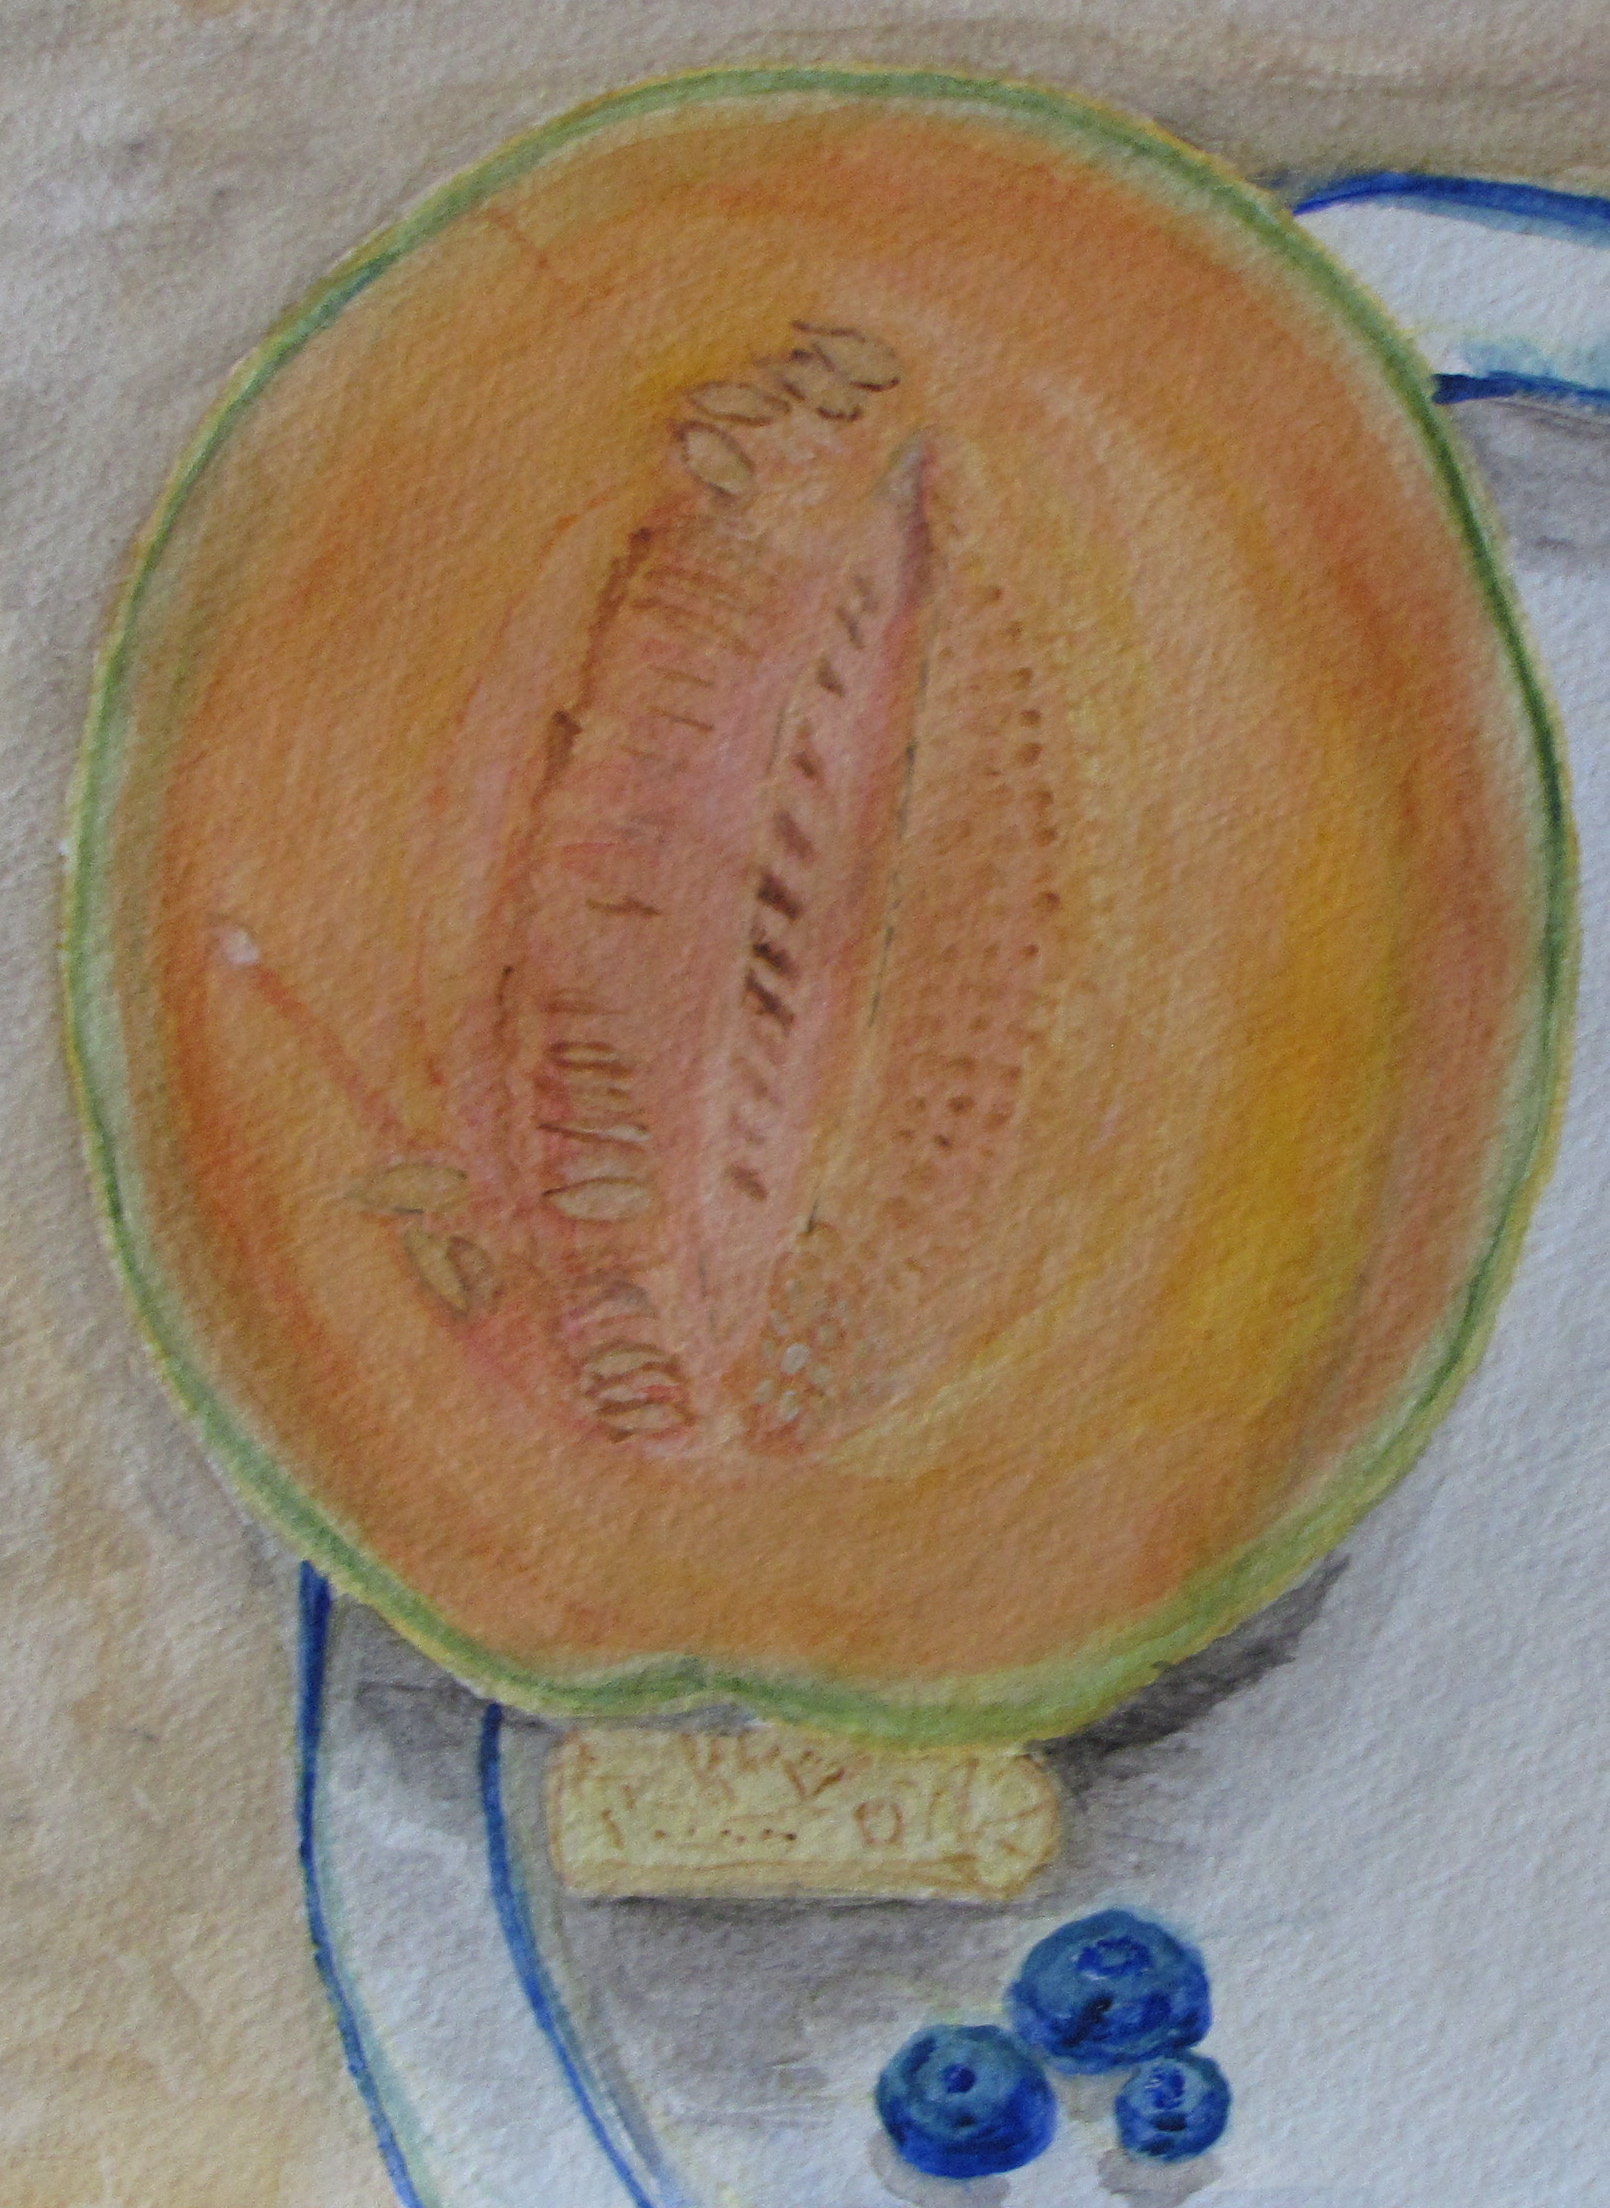 Still Life with Cantaloupe (detail). Russell Steven Powell watercolor, 11x15